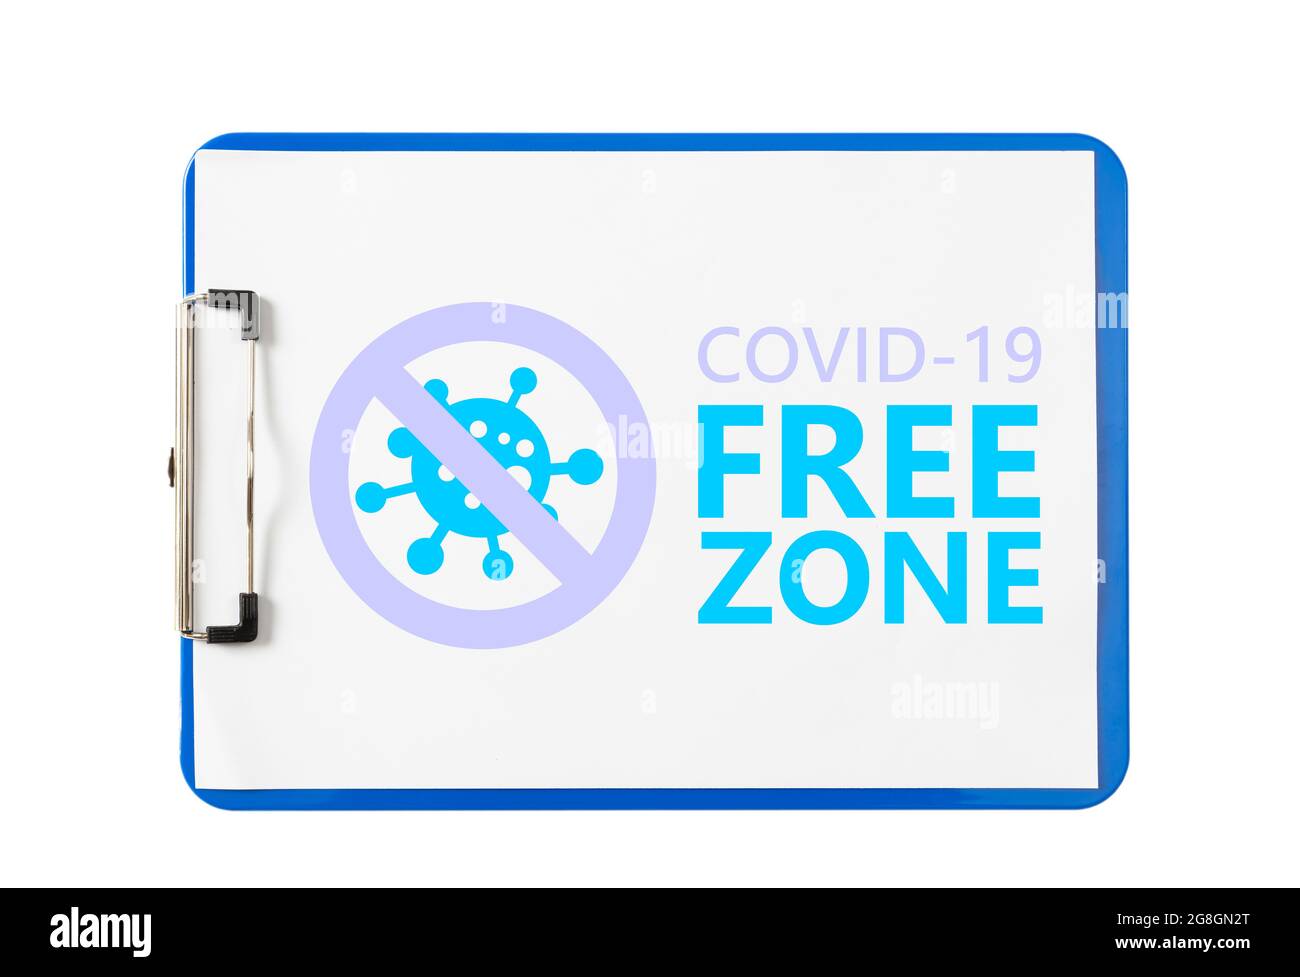 Covid free zone sign. COVID-19 free zone text on a doctors clipboard, white background. Disinfected areas, vaccinated only concept. Coronavirus free a Stock Photo